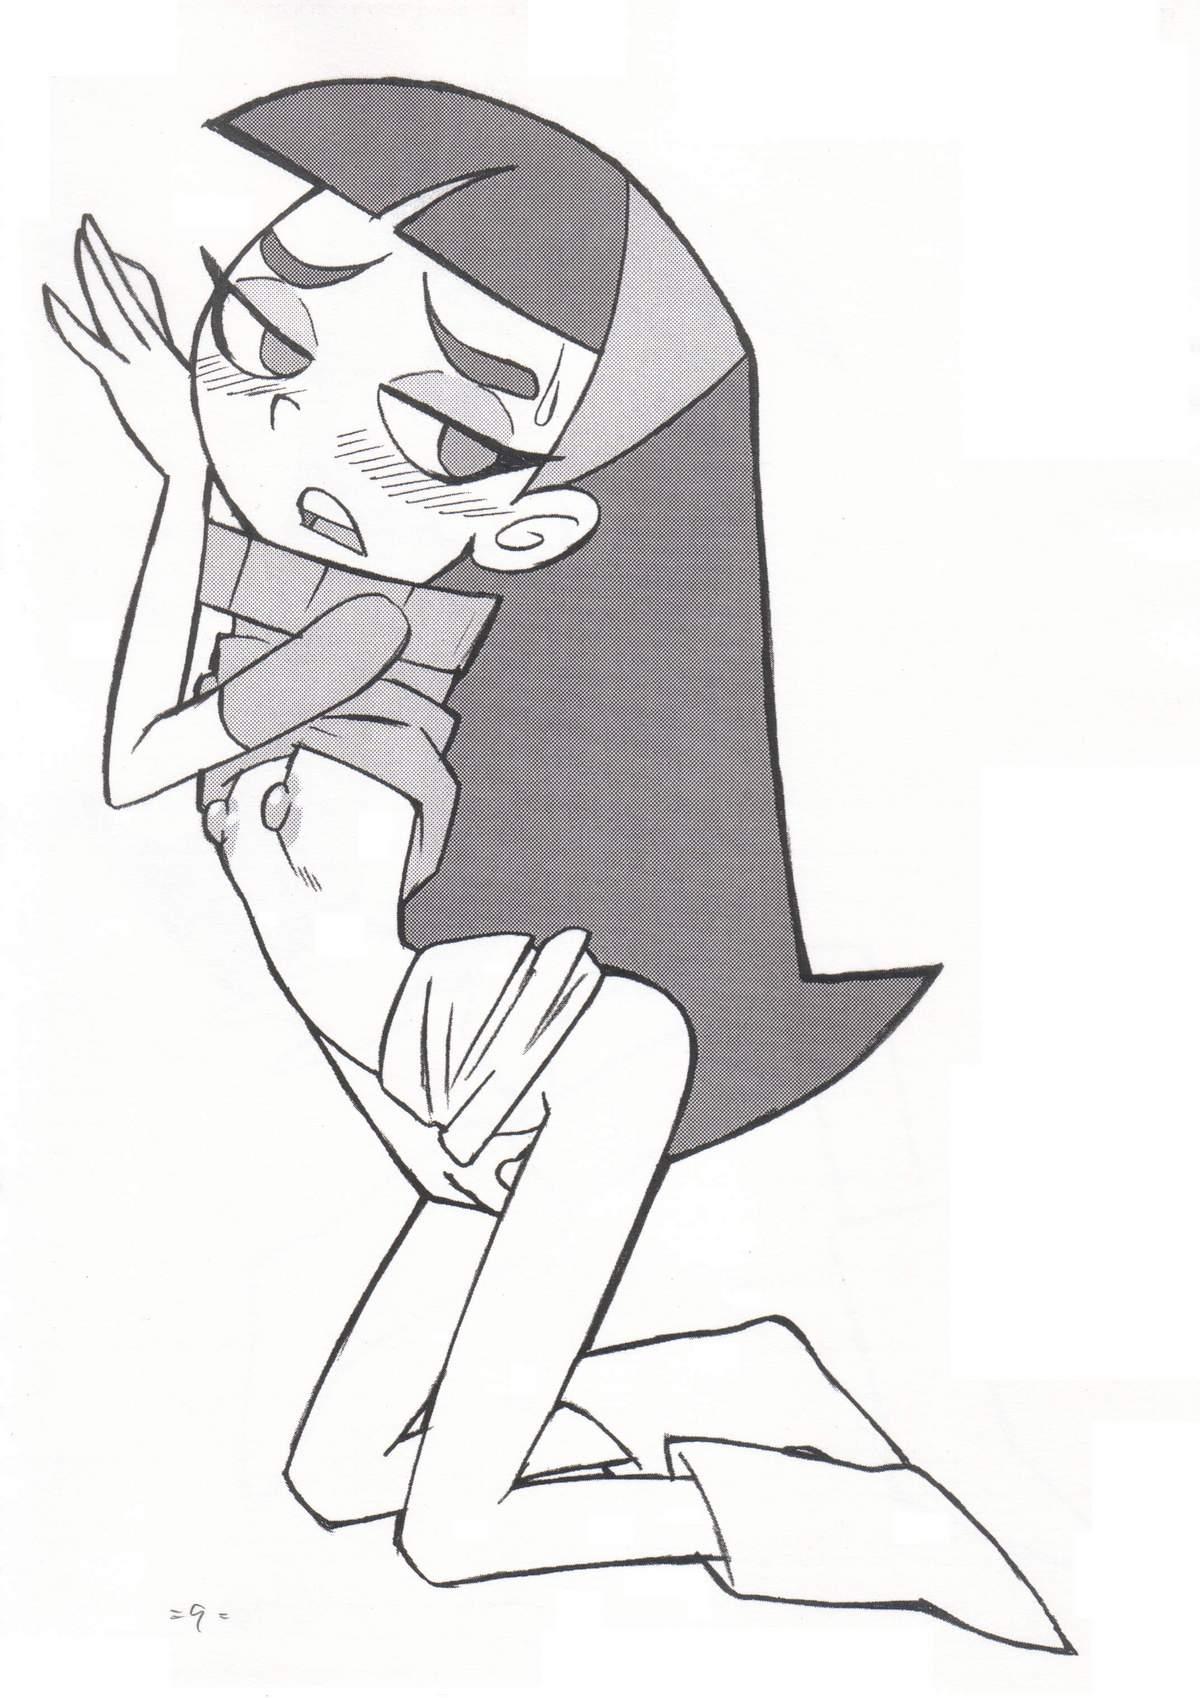 Bangkok Psychosomatic Counterfeit Ex: Trixie - The fairly oddparents Assfuck - Page 8